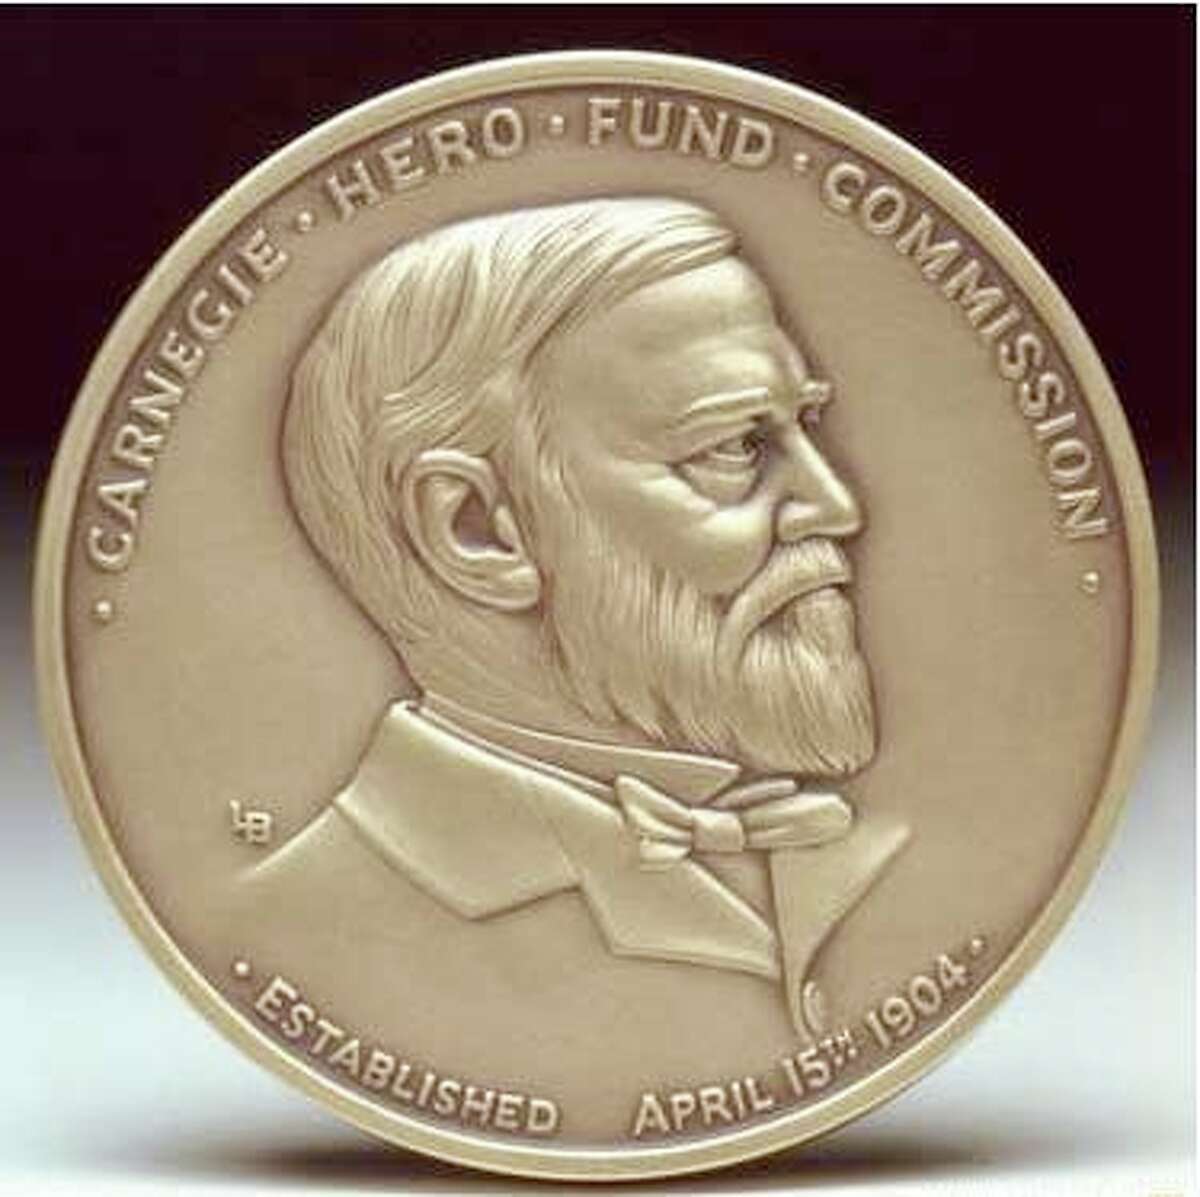 The Carnegie Medal is given to those who risk their lives to an extraordinary degree while saving, or attempting to save, the lives of others.